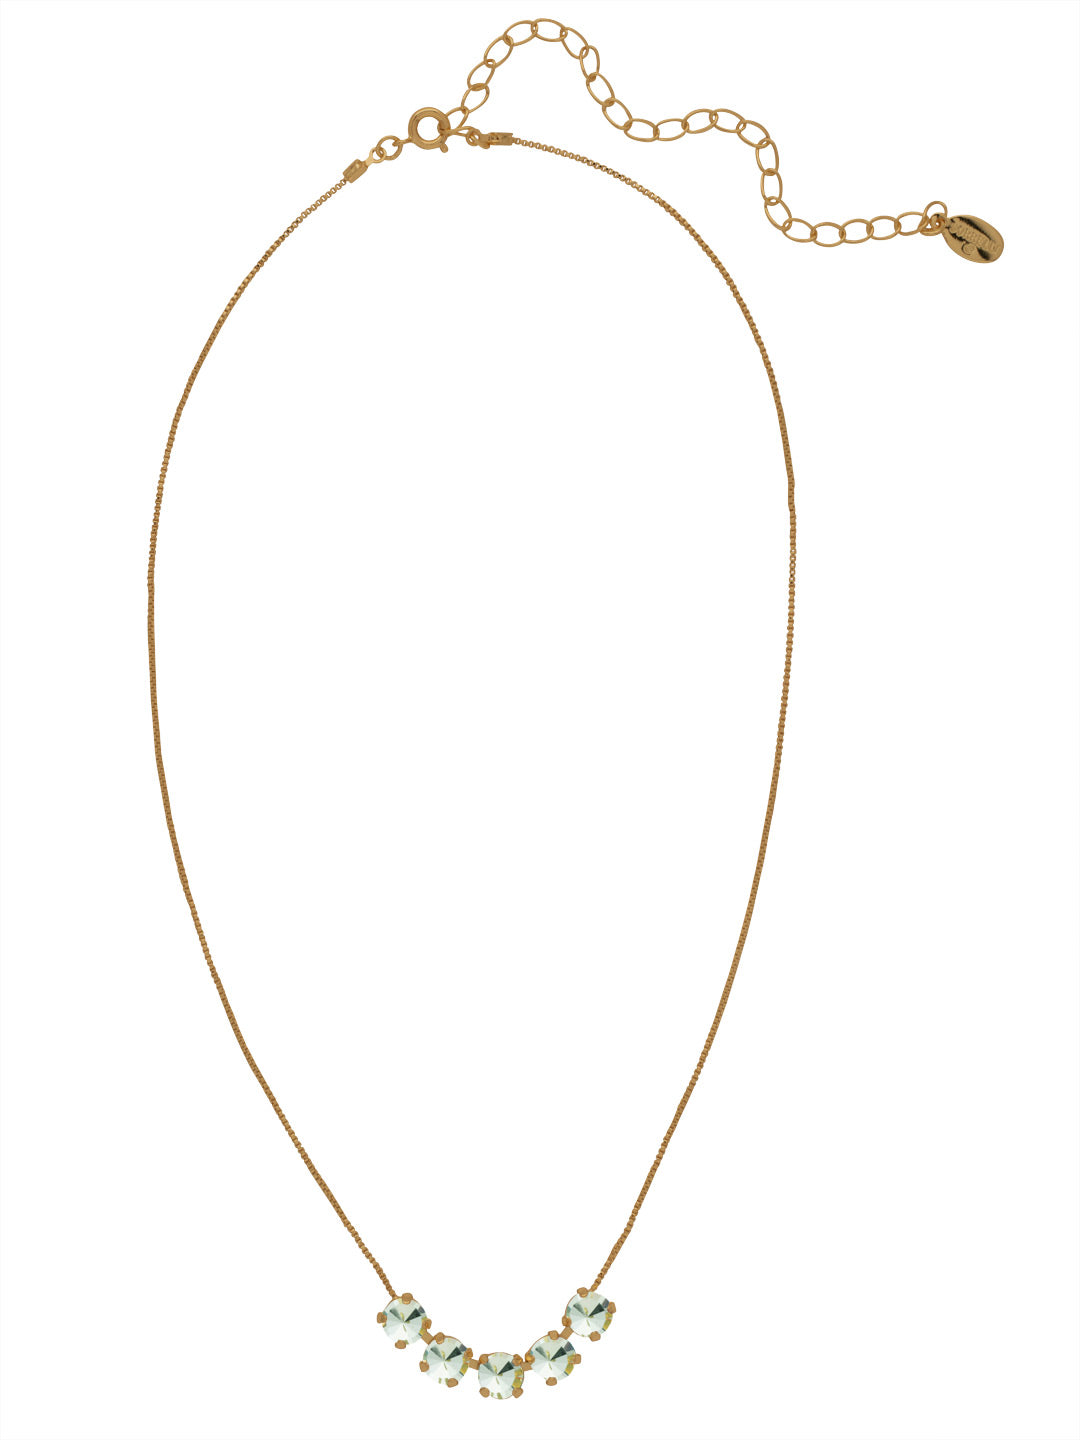 Shaughna Tennis Necklace - NFC84AGMIN - <p>The Shaughna Tennis Necklace features five crystals on a delicate adjustable chain. From Sorrelli's Mint collection in our Antique Gold-tone finish.</p>